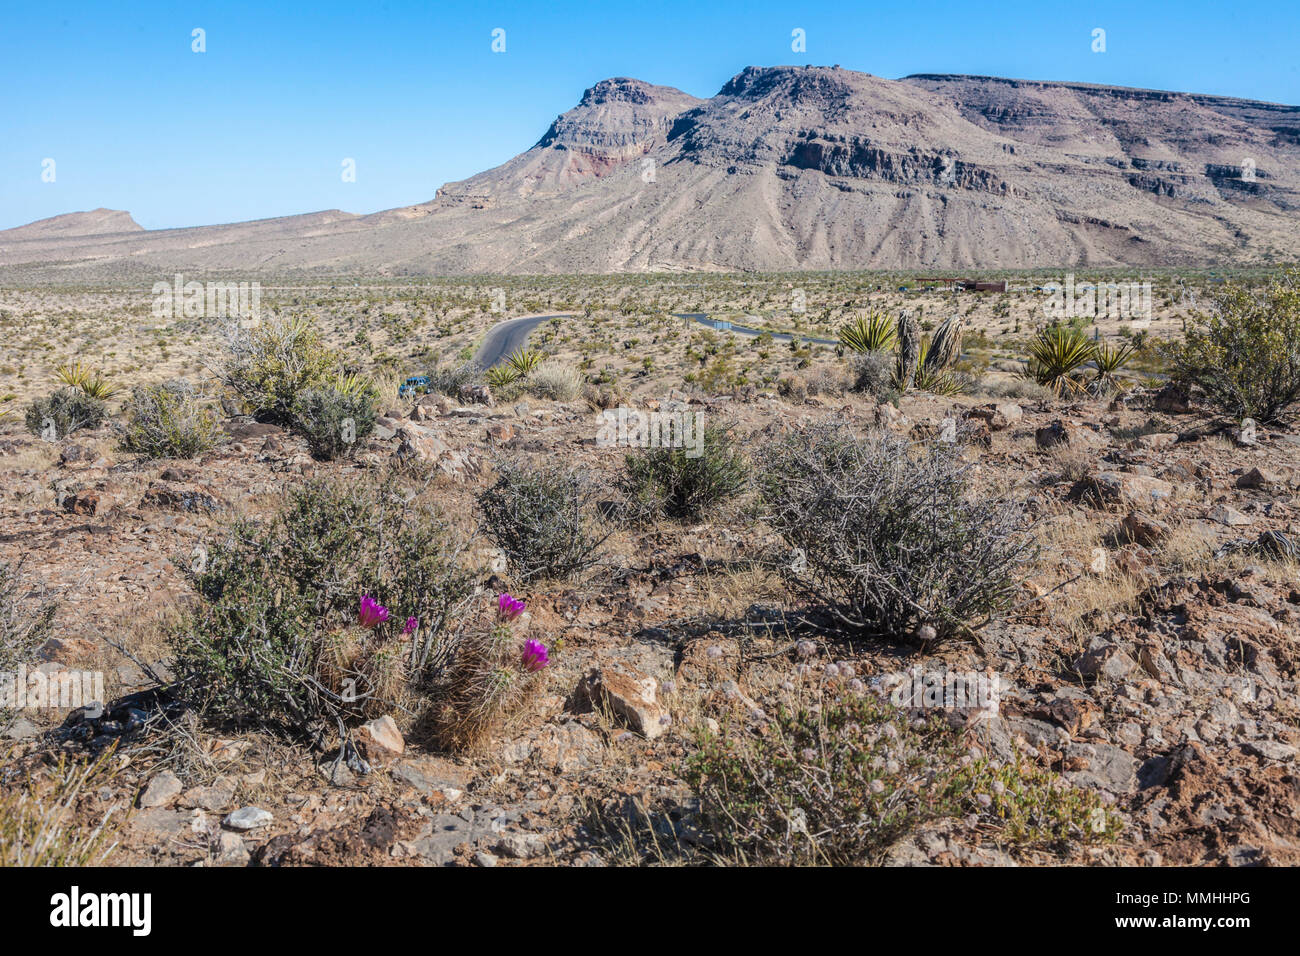 Flowering cactii and a serpentine road at Red Rock Canyon National Conservation Area outside of Las Vegas, Nevada Stock Photo